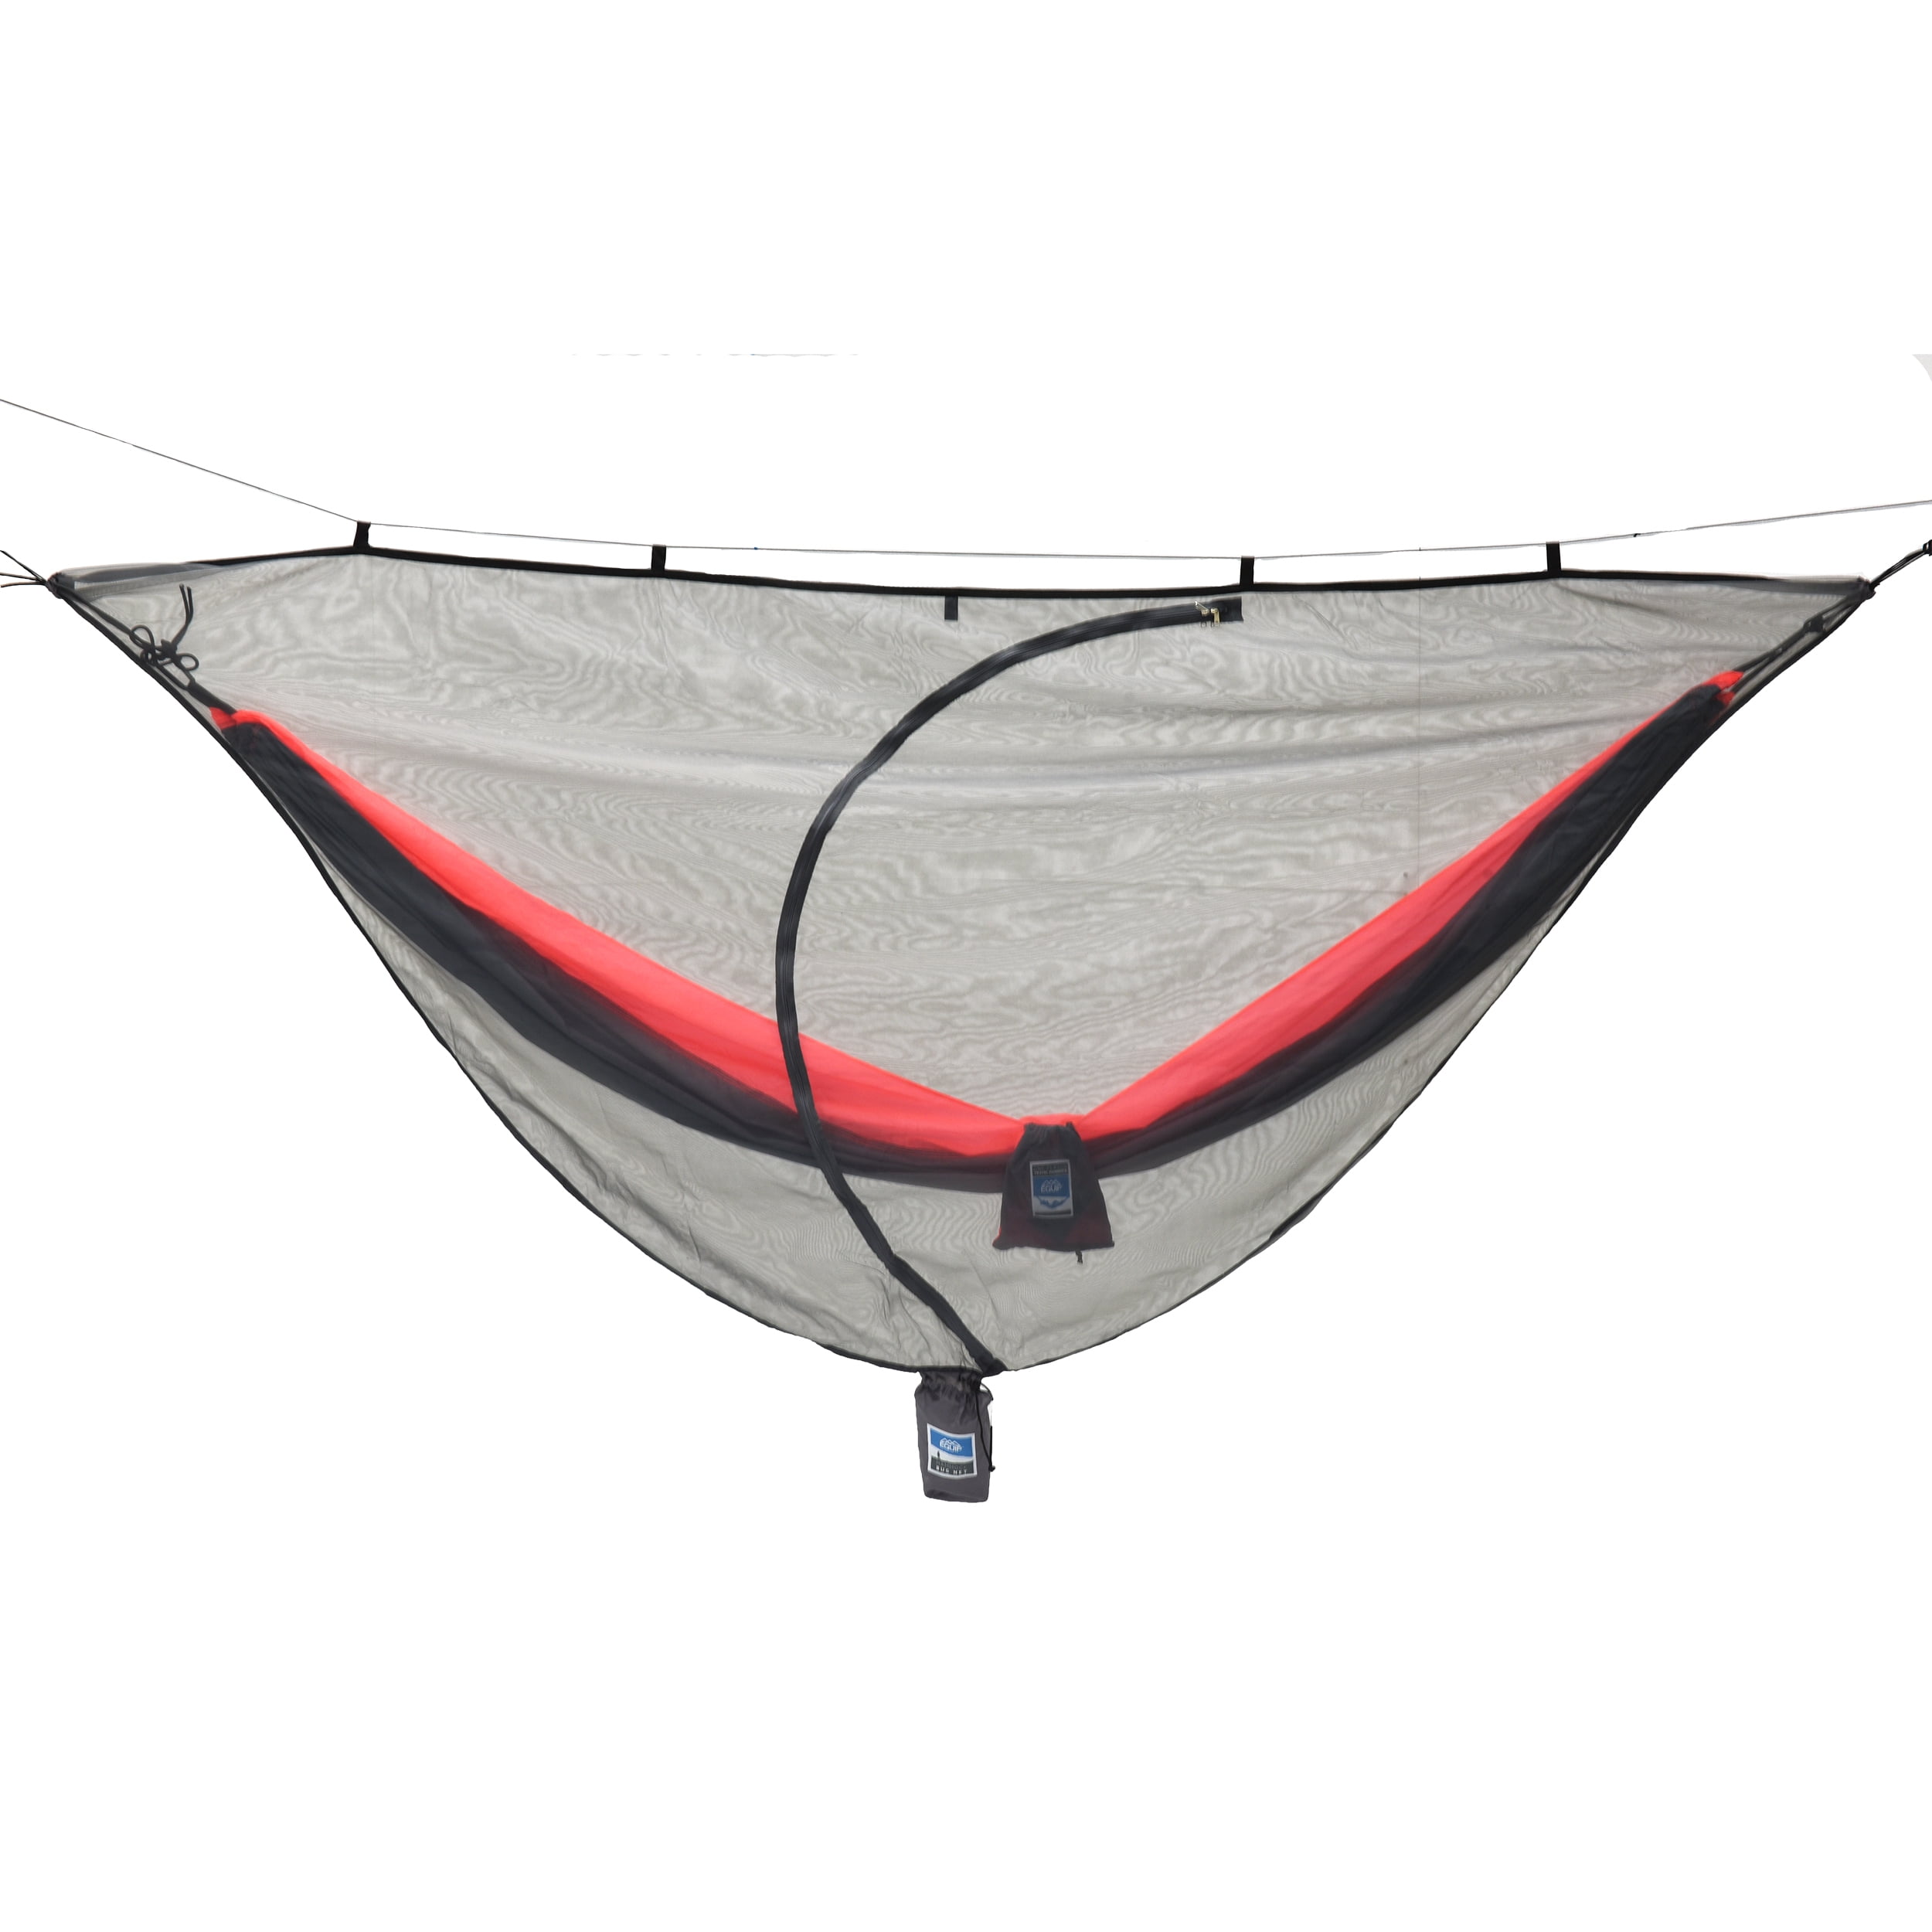 Equip Portable Hammock Bug Net, Gray Polyester Mosquito Net for Camping